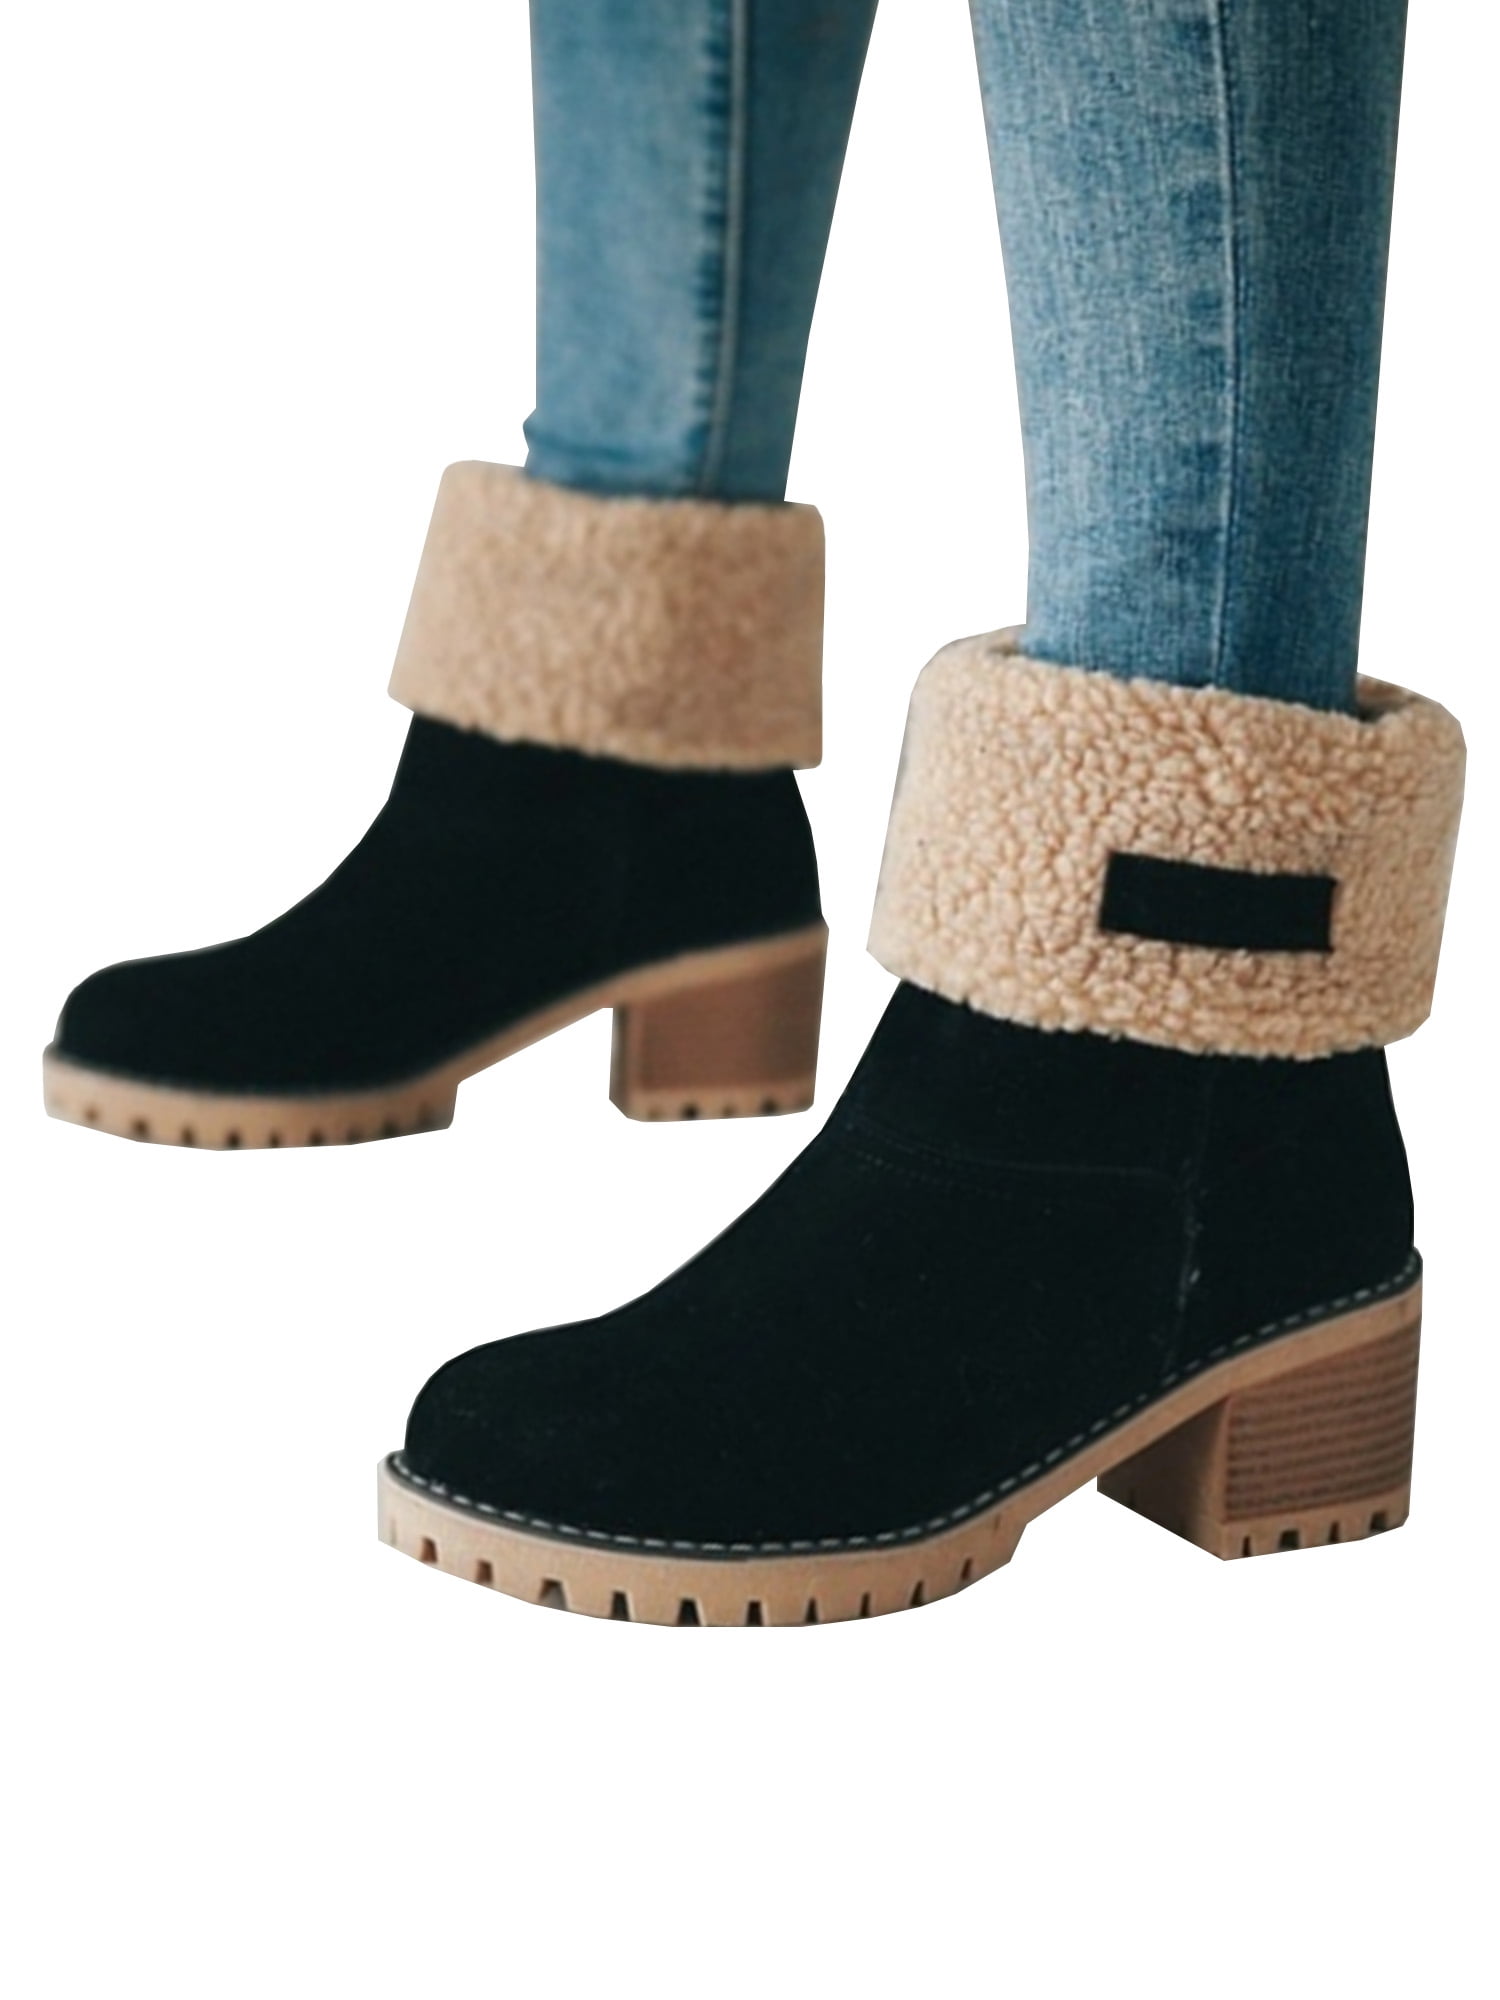 Details about   Womens Fashion Faux Suede Rabbit Fur Lace Up Mid Heel Knee High Boots Shoes SUNS 